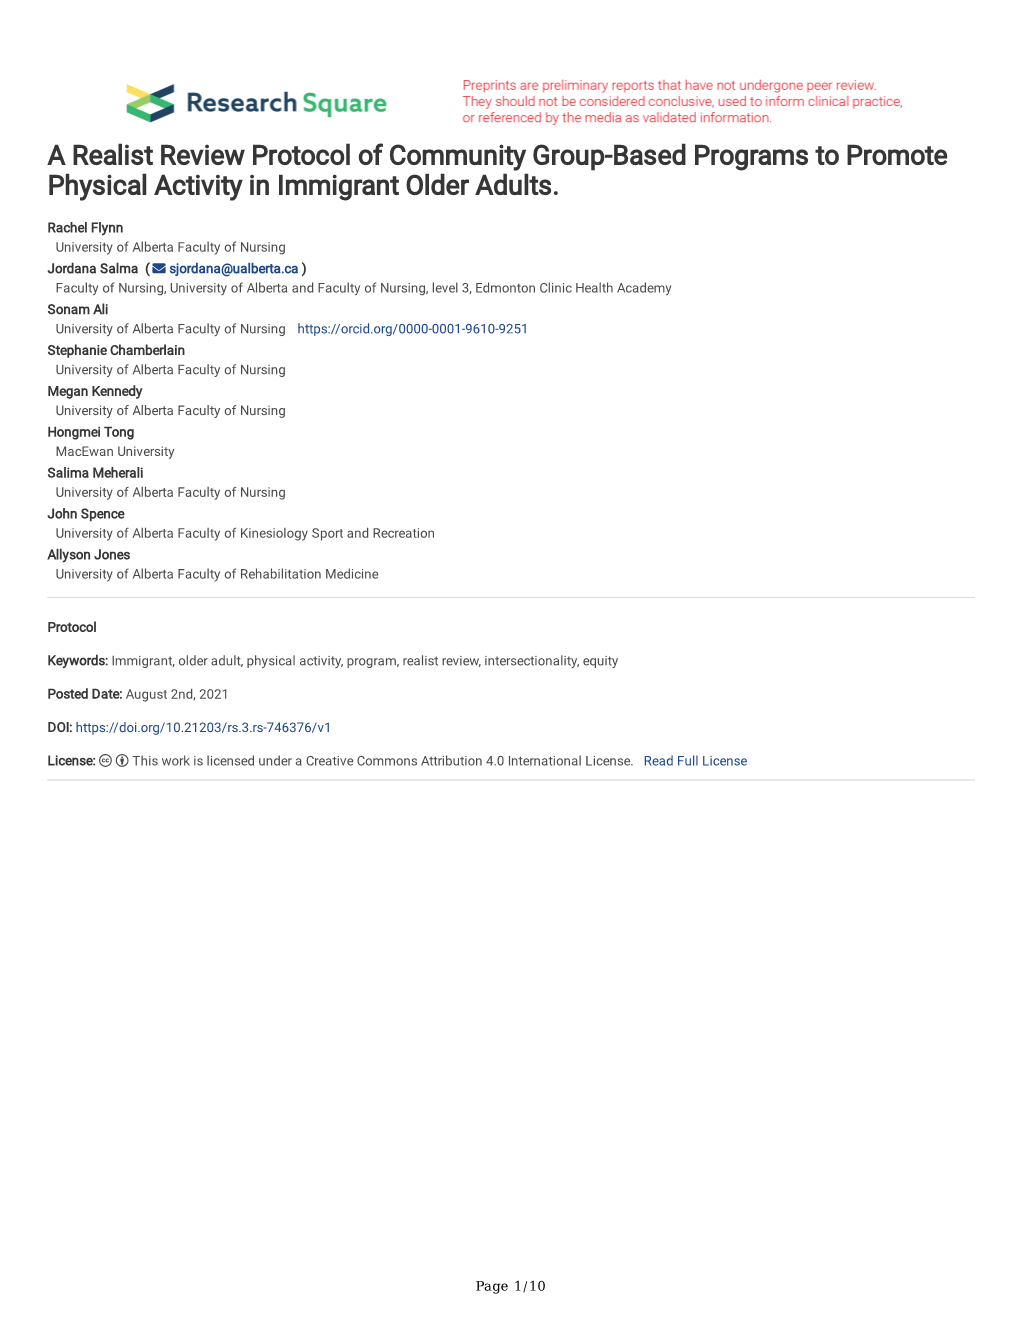 A Realist Review Protocol of Community Group-Based Programs to Promote Physical Activity in Immigrant Older Adults